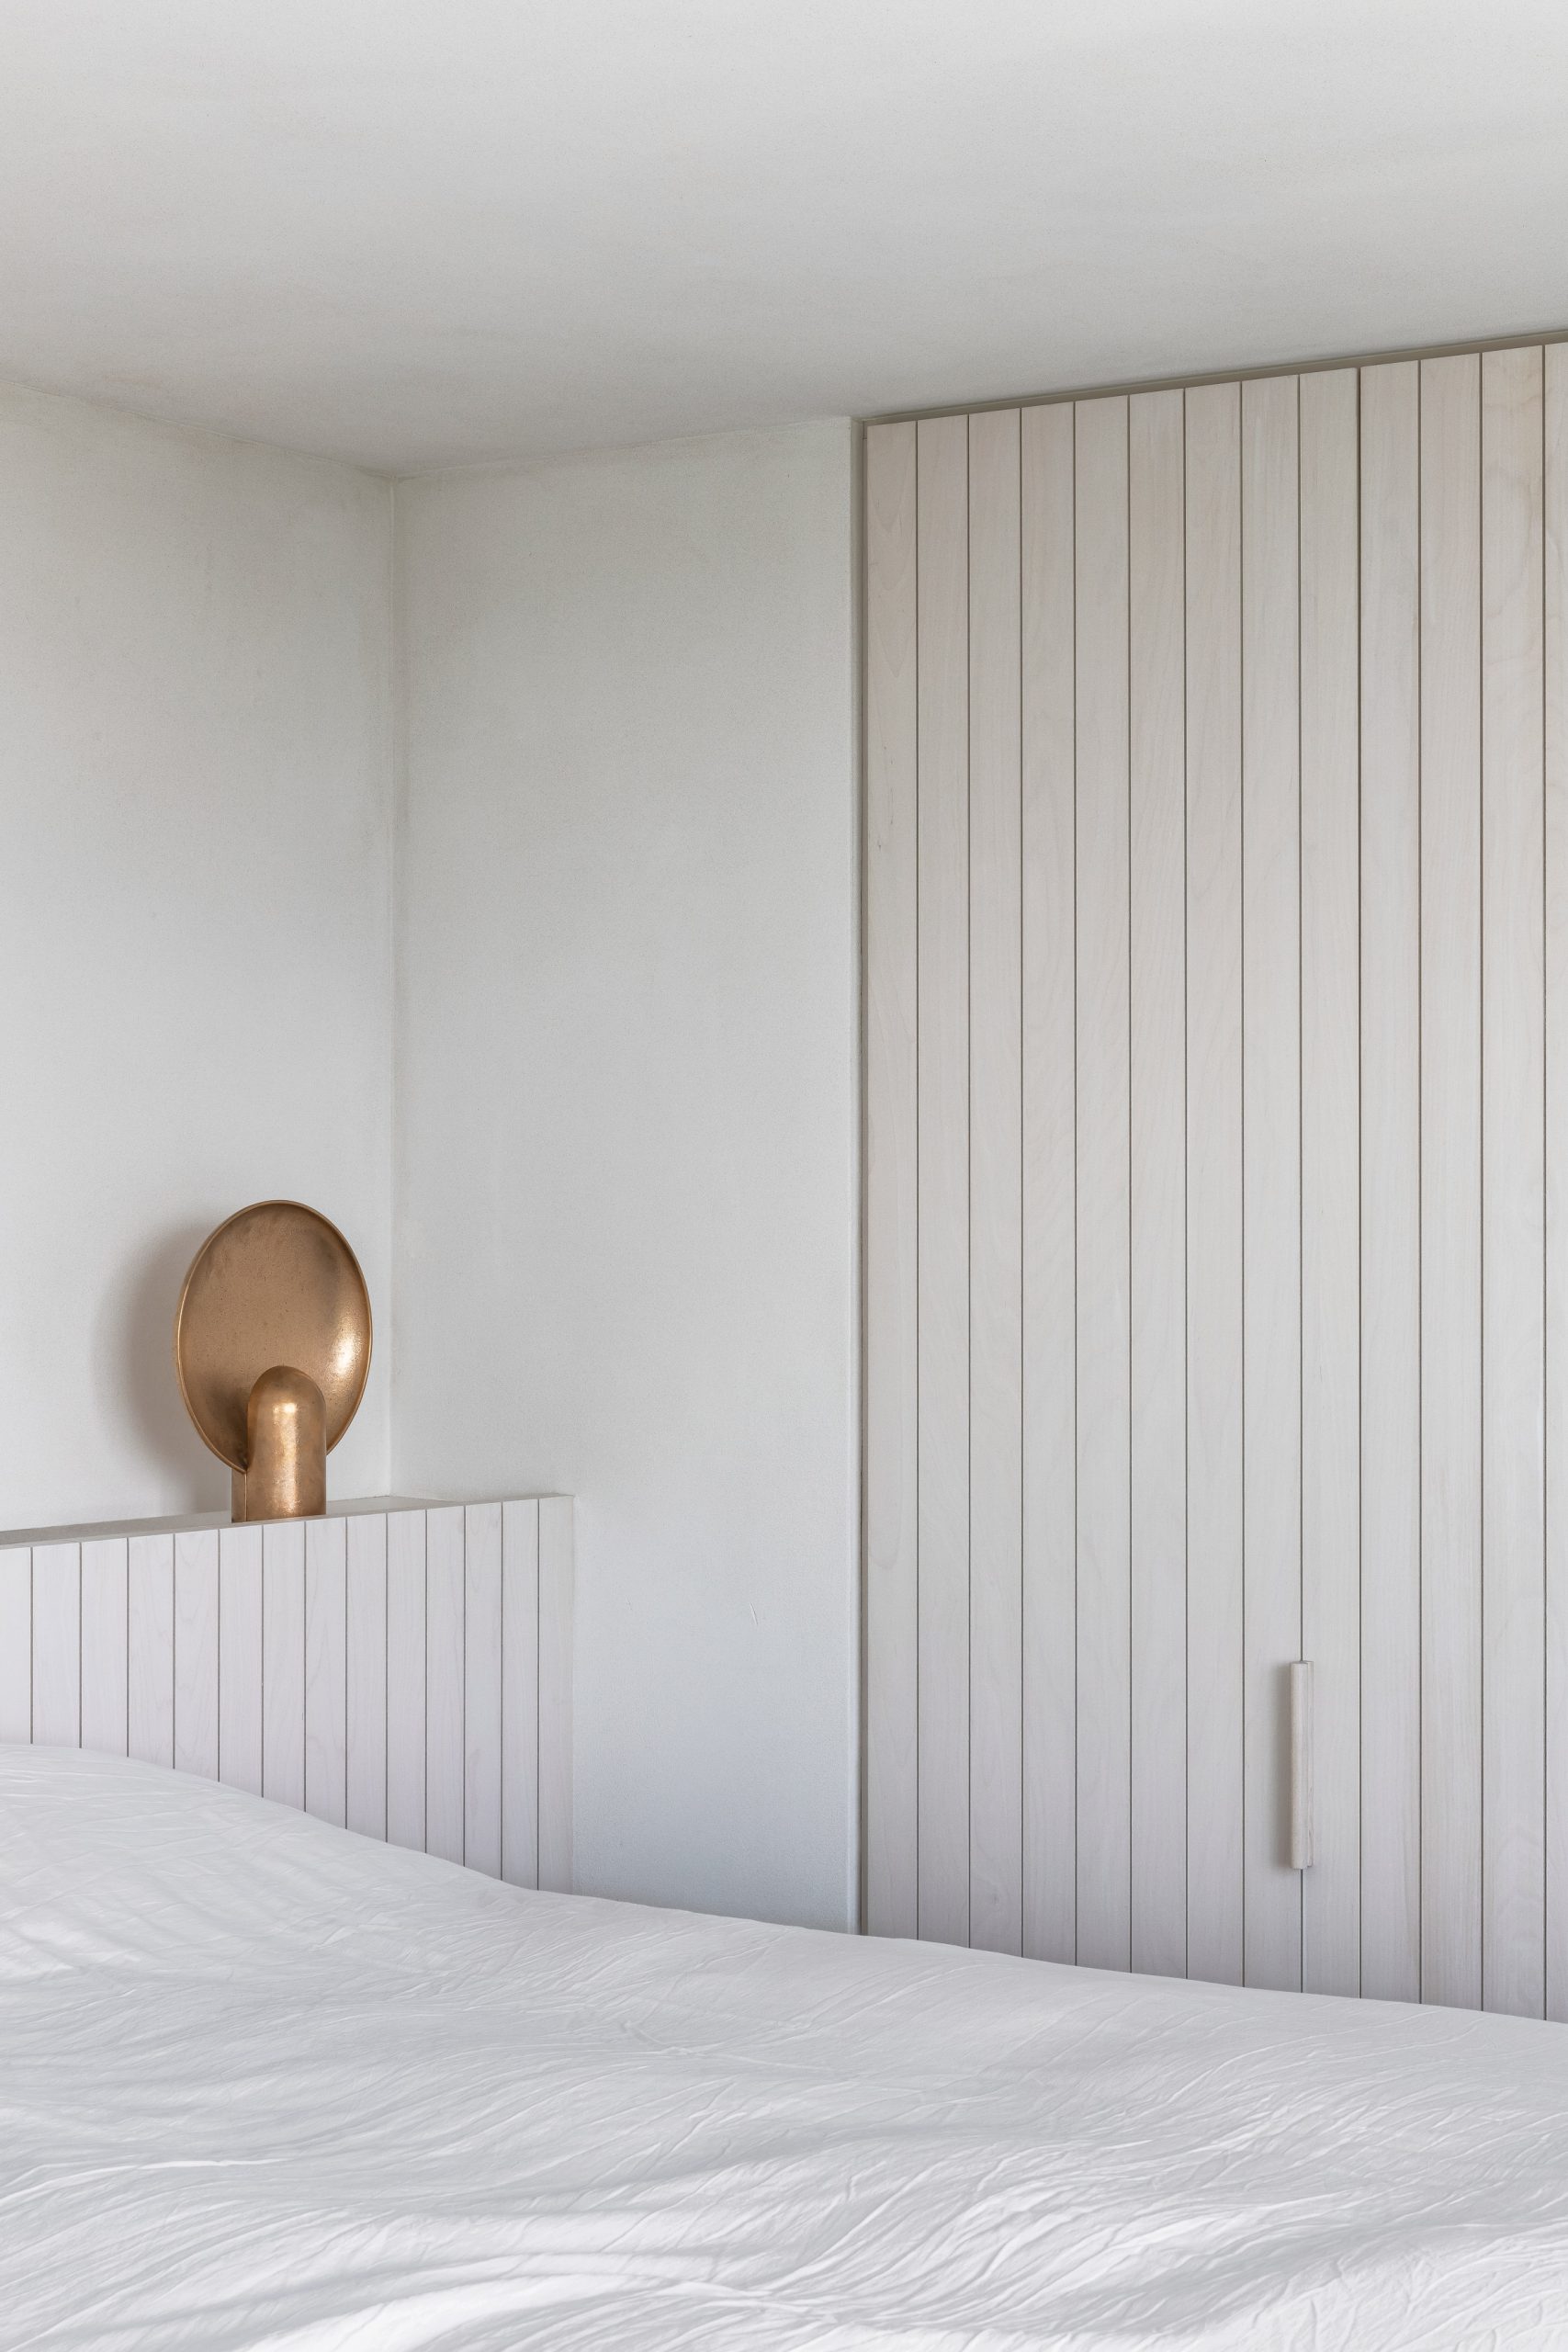 Bedroom of Belgian apartment features white joinery